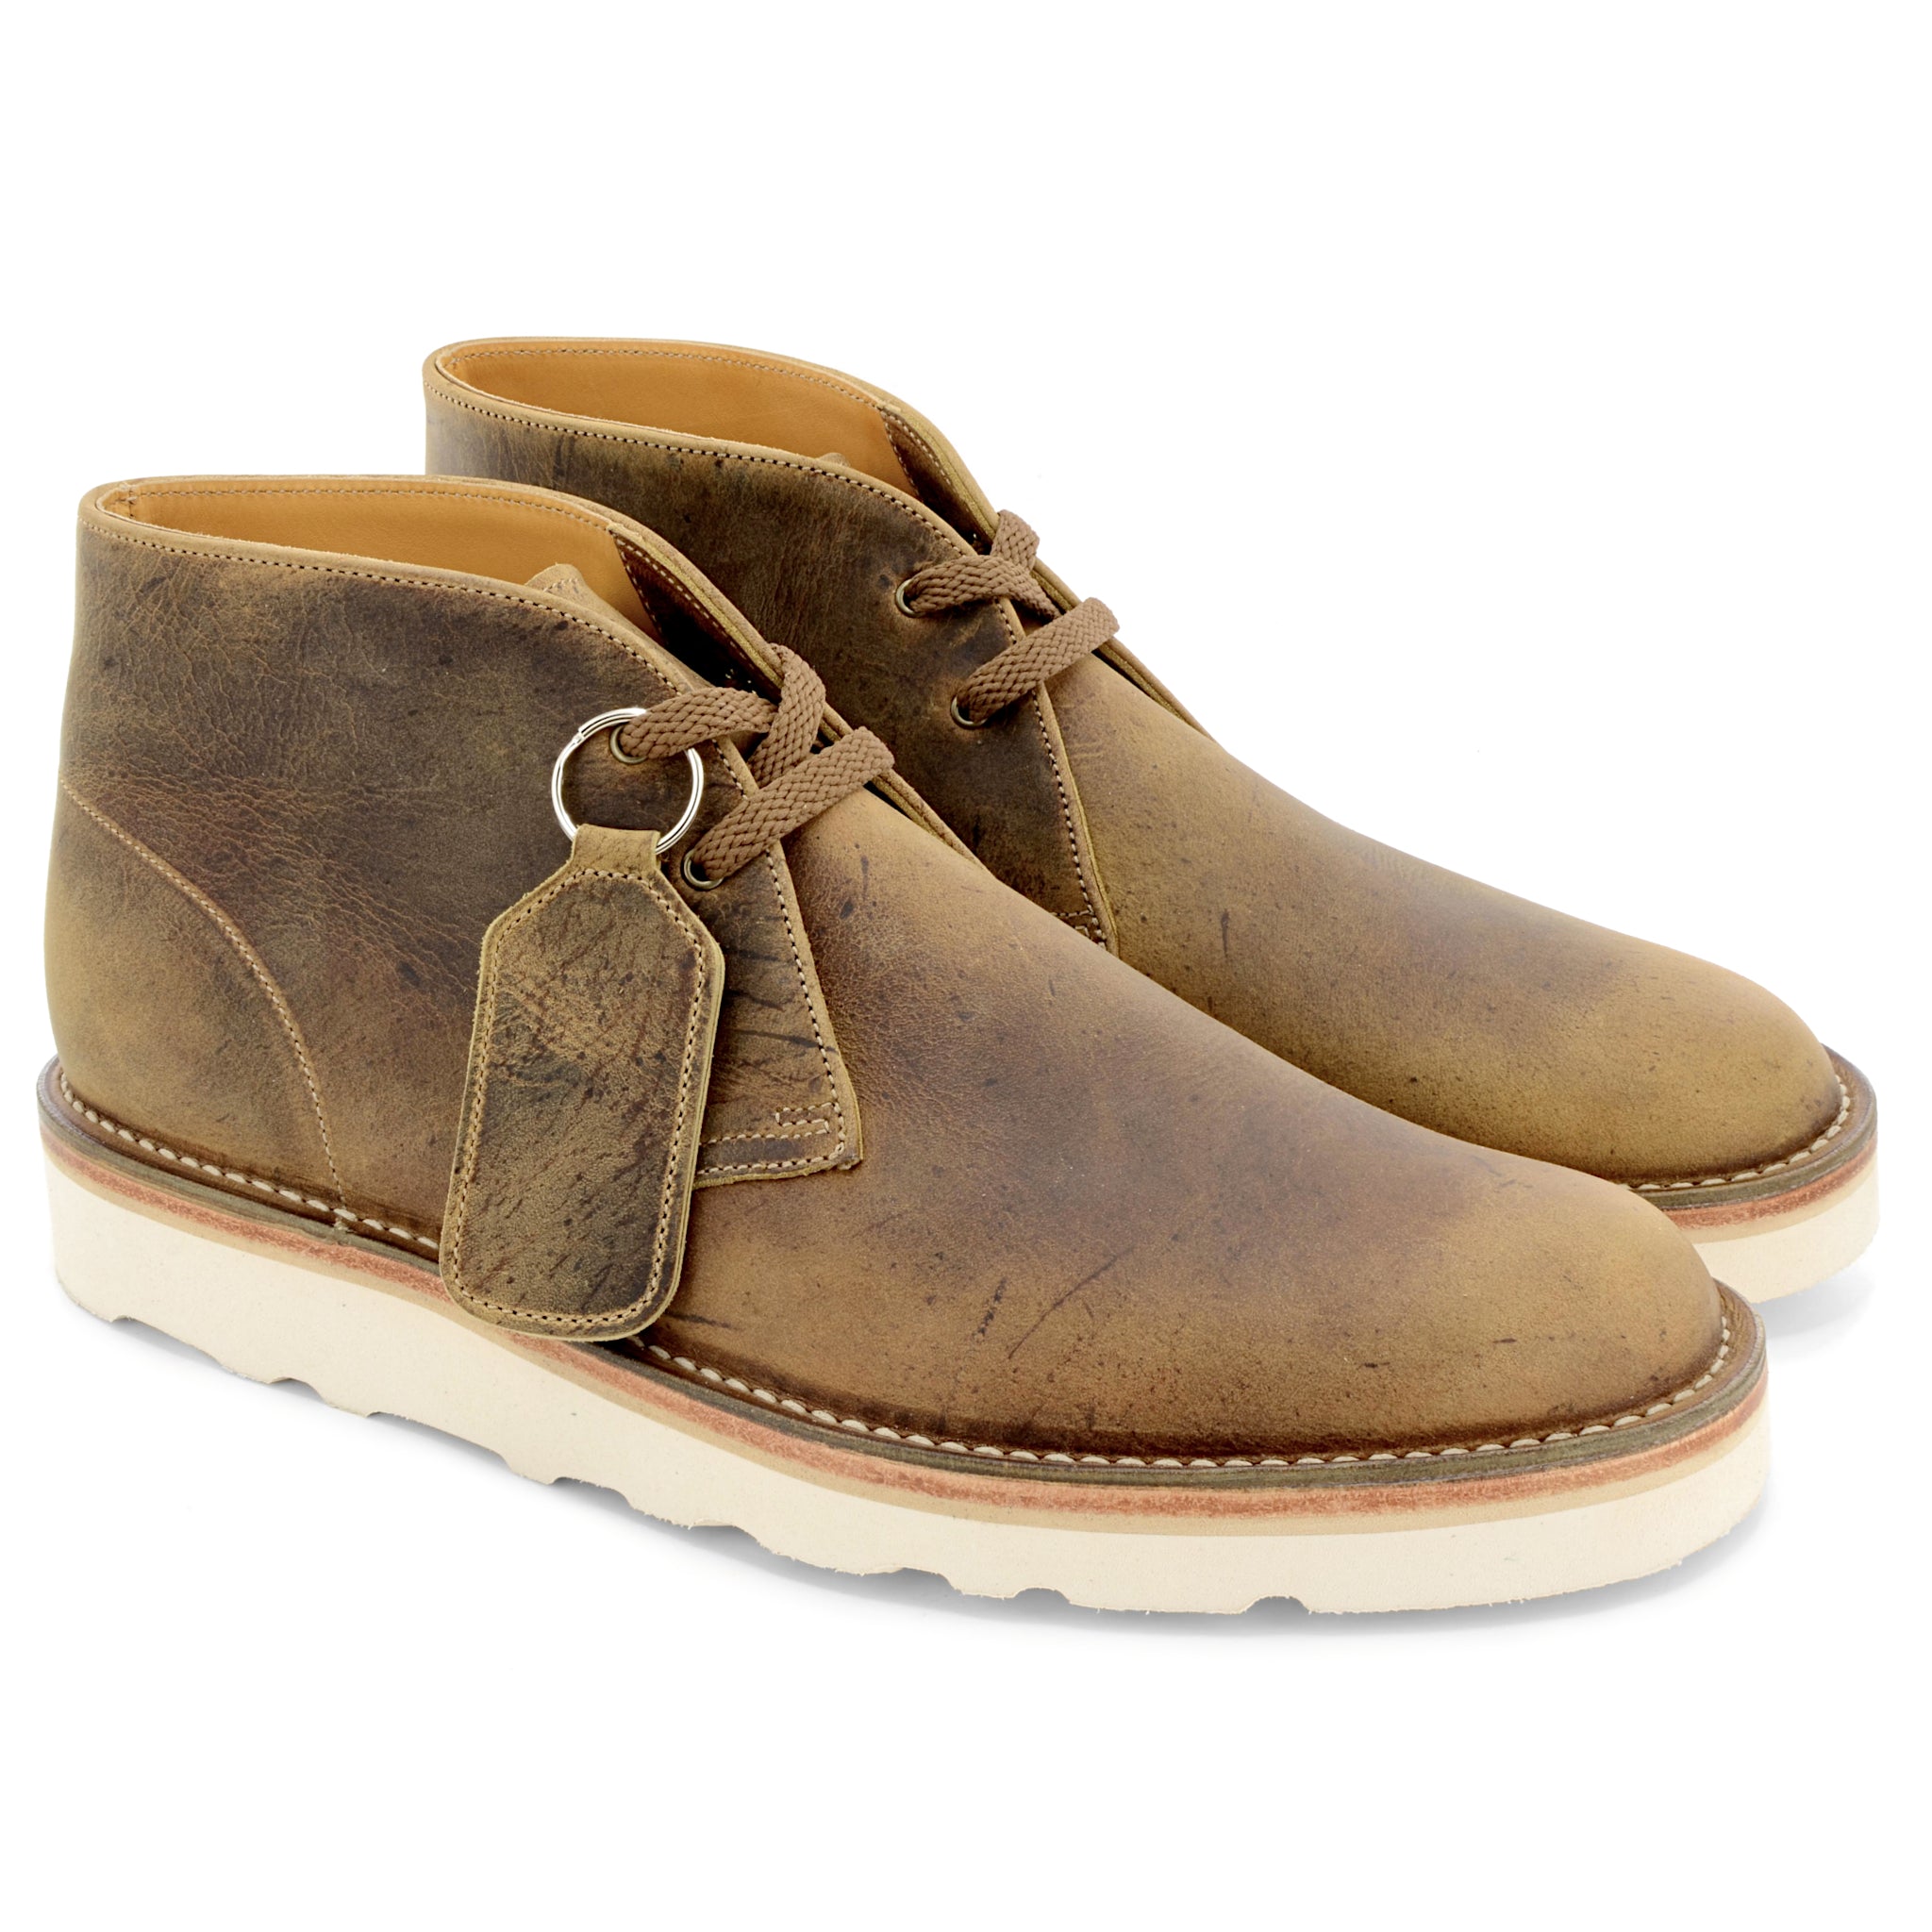 Premium Kudu Leather Desert Boots MADE IN ENGLAND – Jadd Shoes